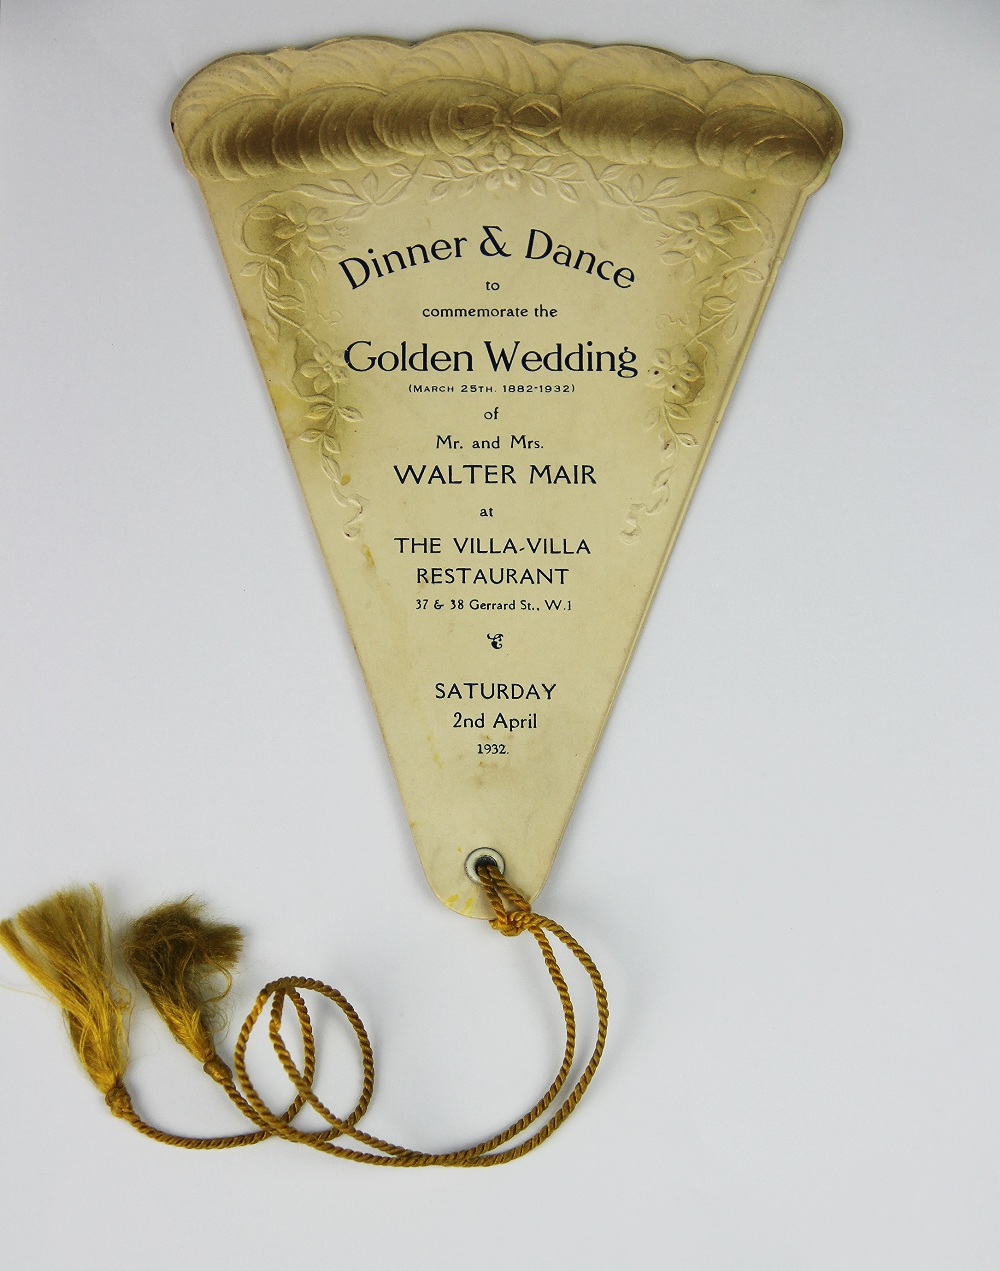 A vintage Wedding dinner and dance invitation modelled as an opening fan,